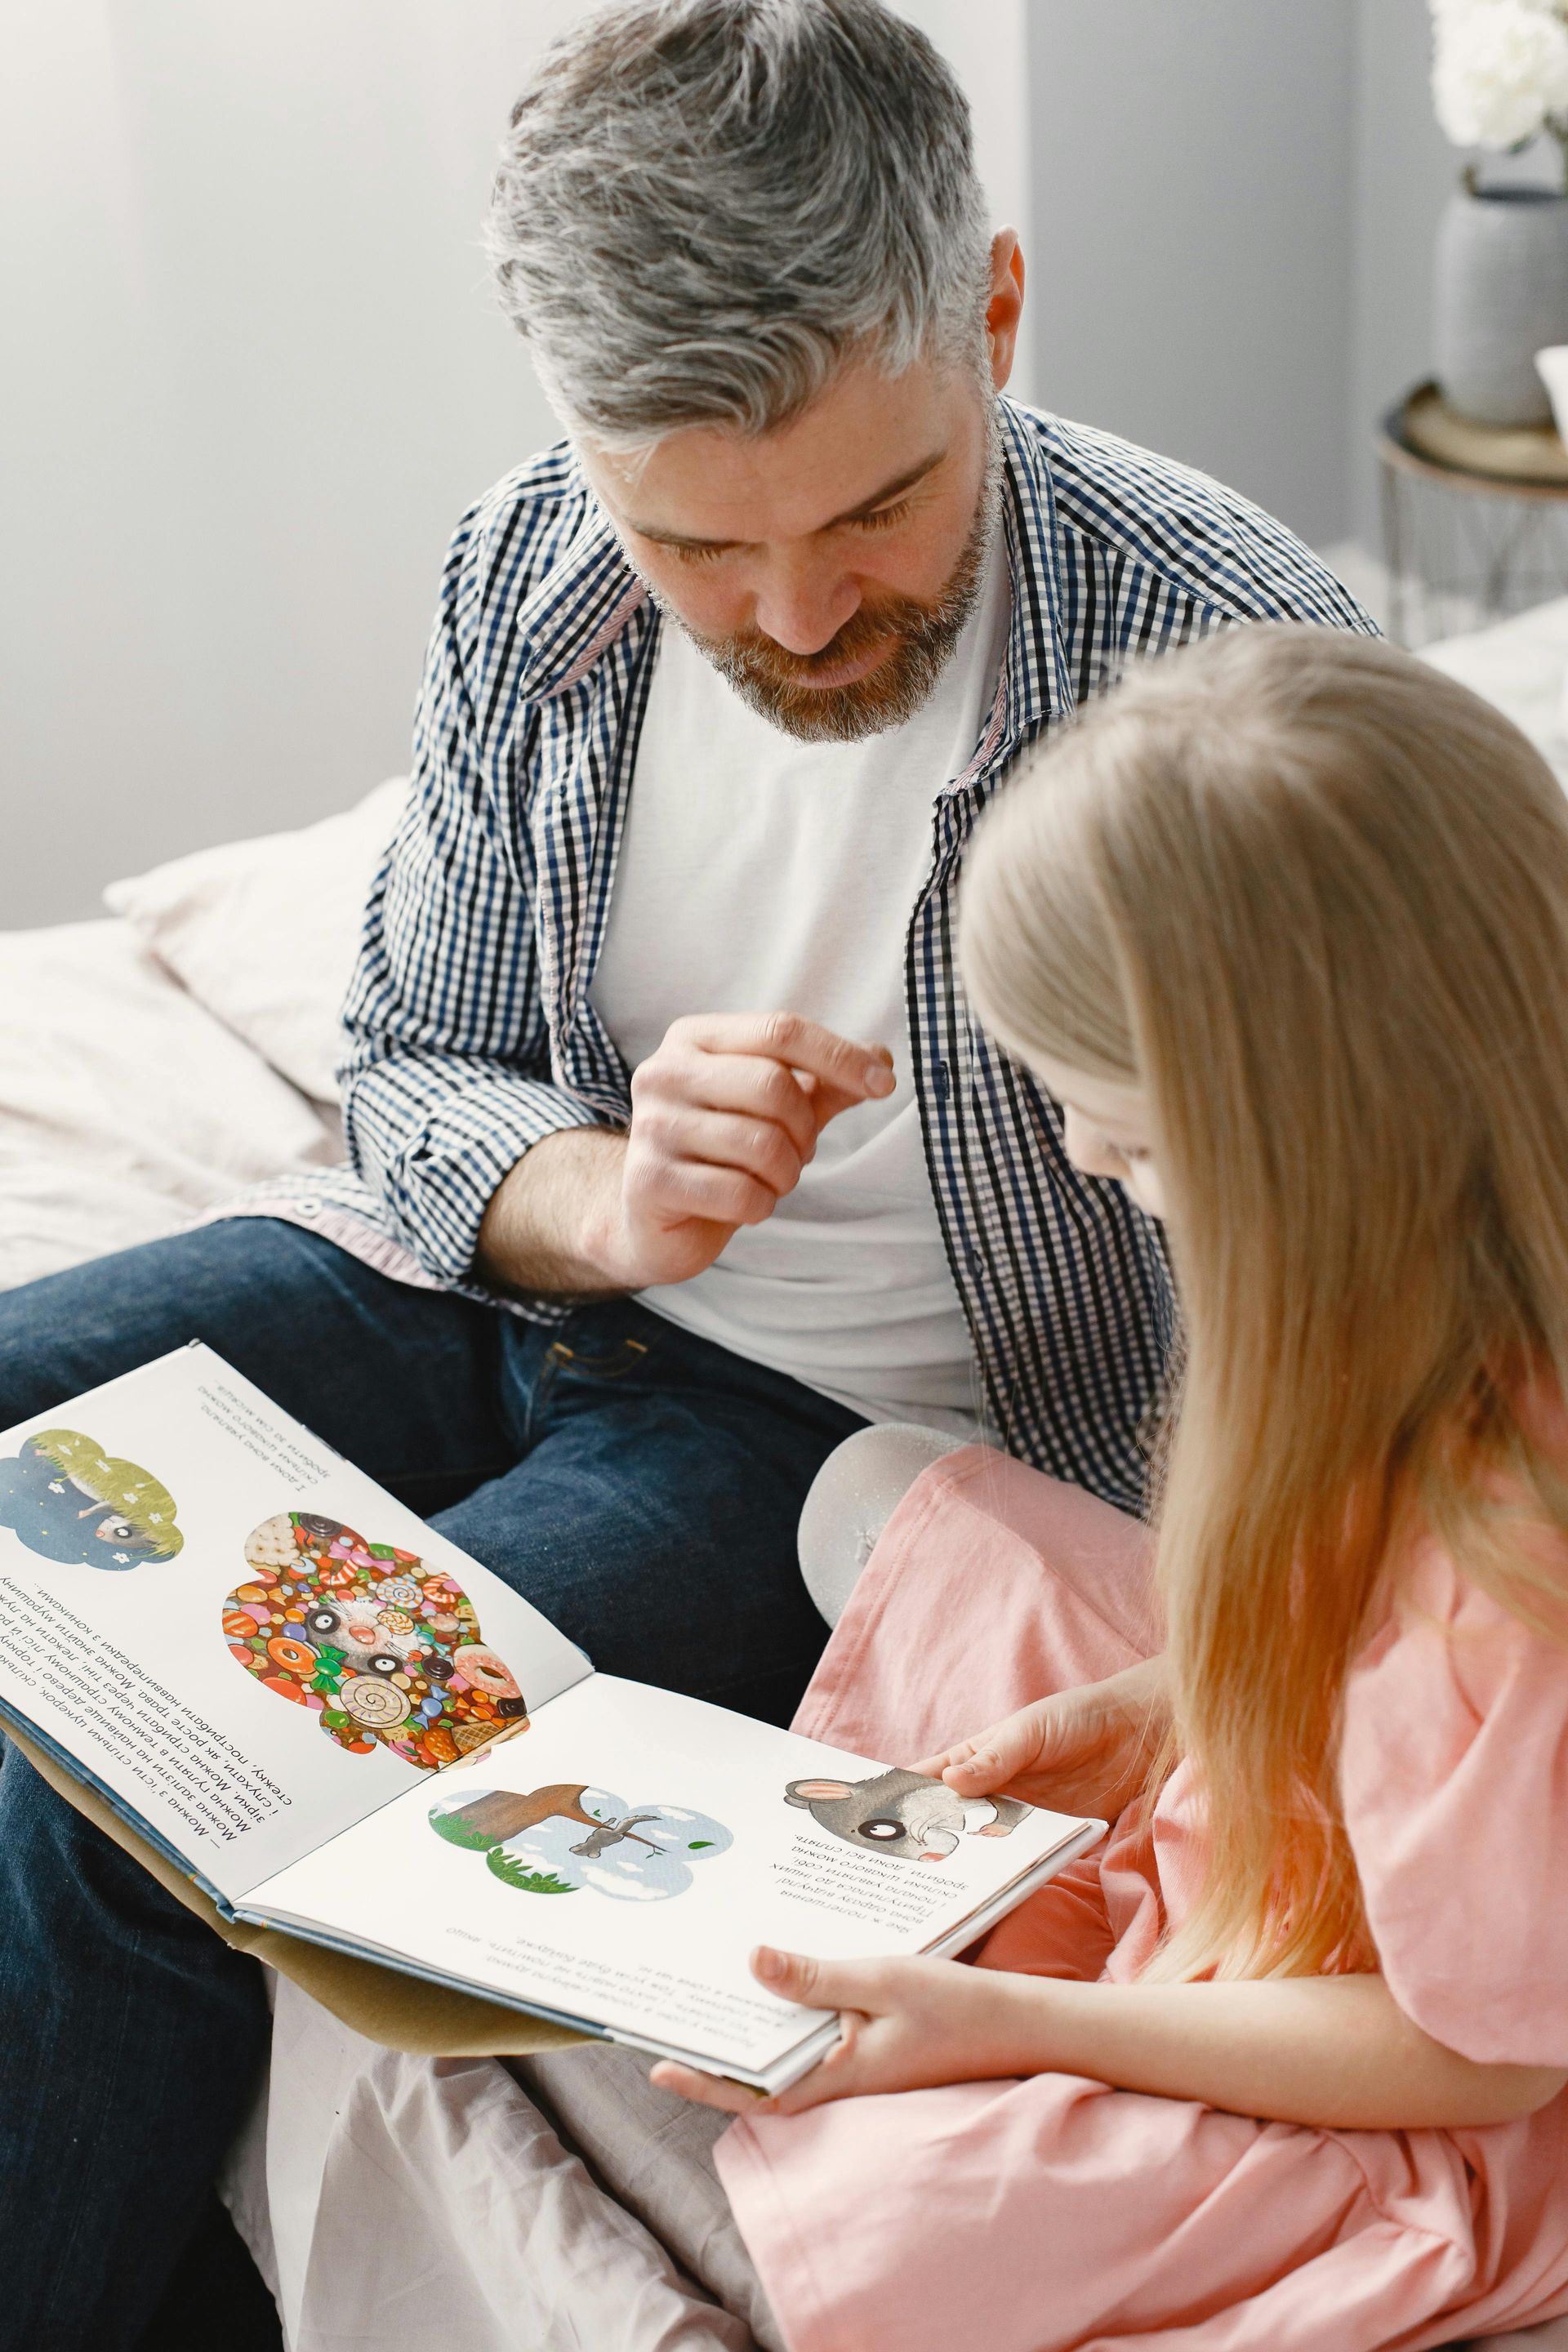 Father dressed nicely telling a story to his attentive child, illustrating the power of storytelling